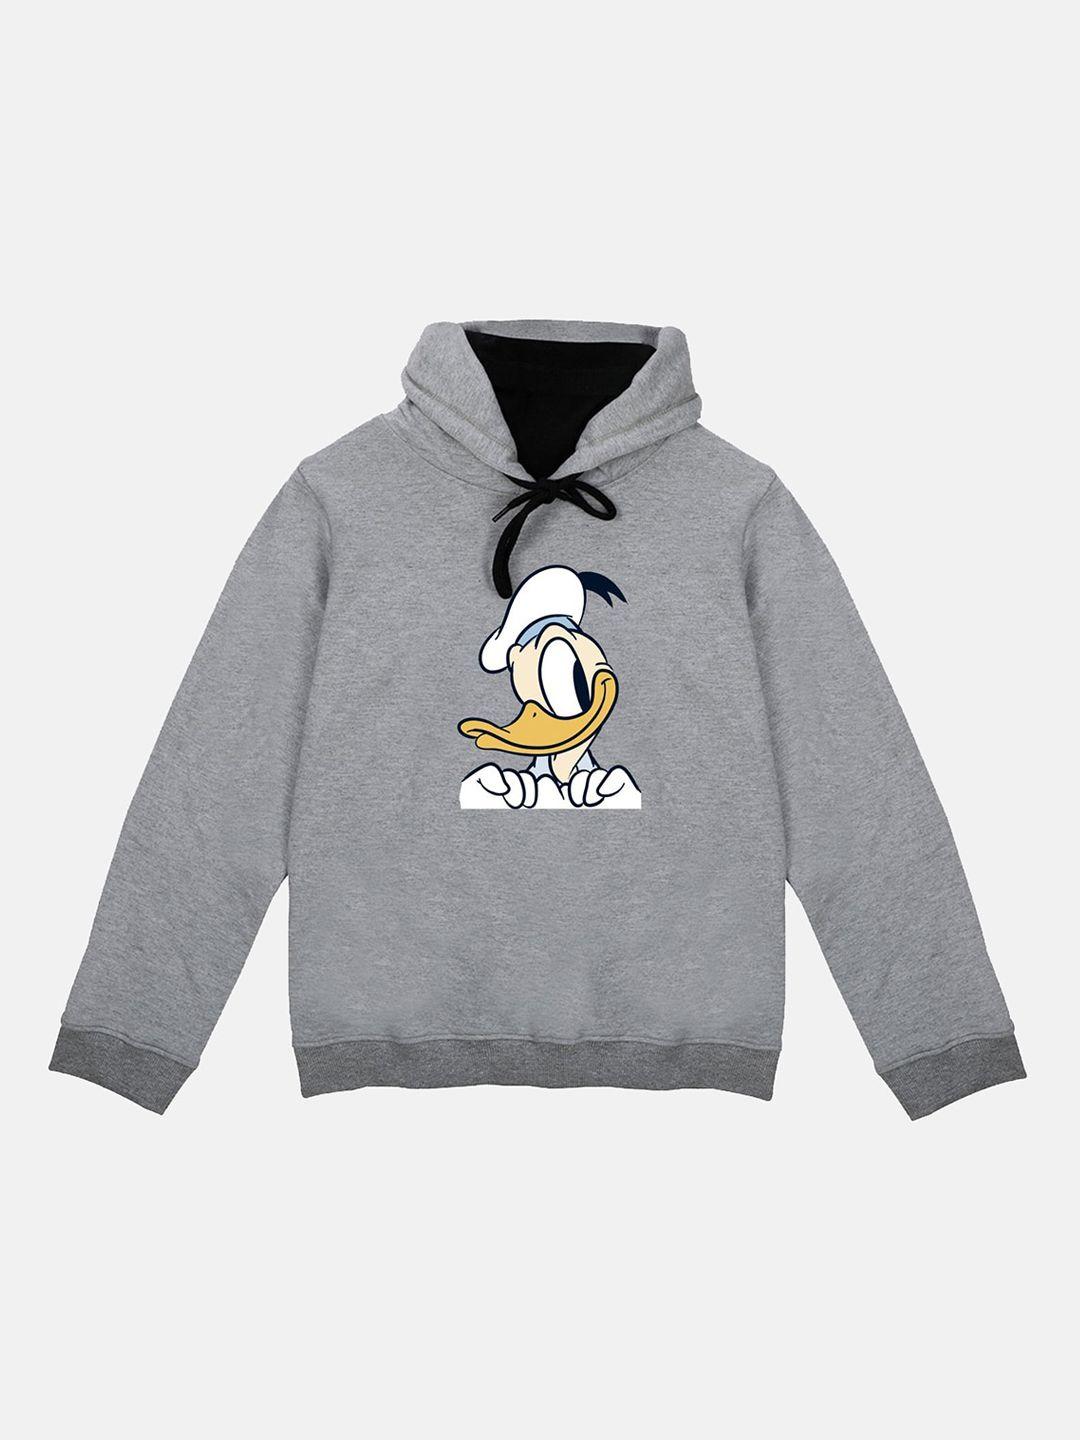 disney by wear your mind kids grey & white donald duck printed hooded sweatshirt